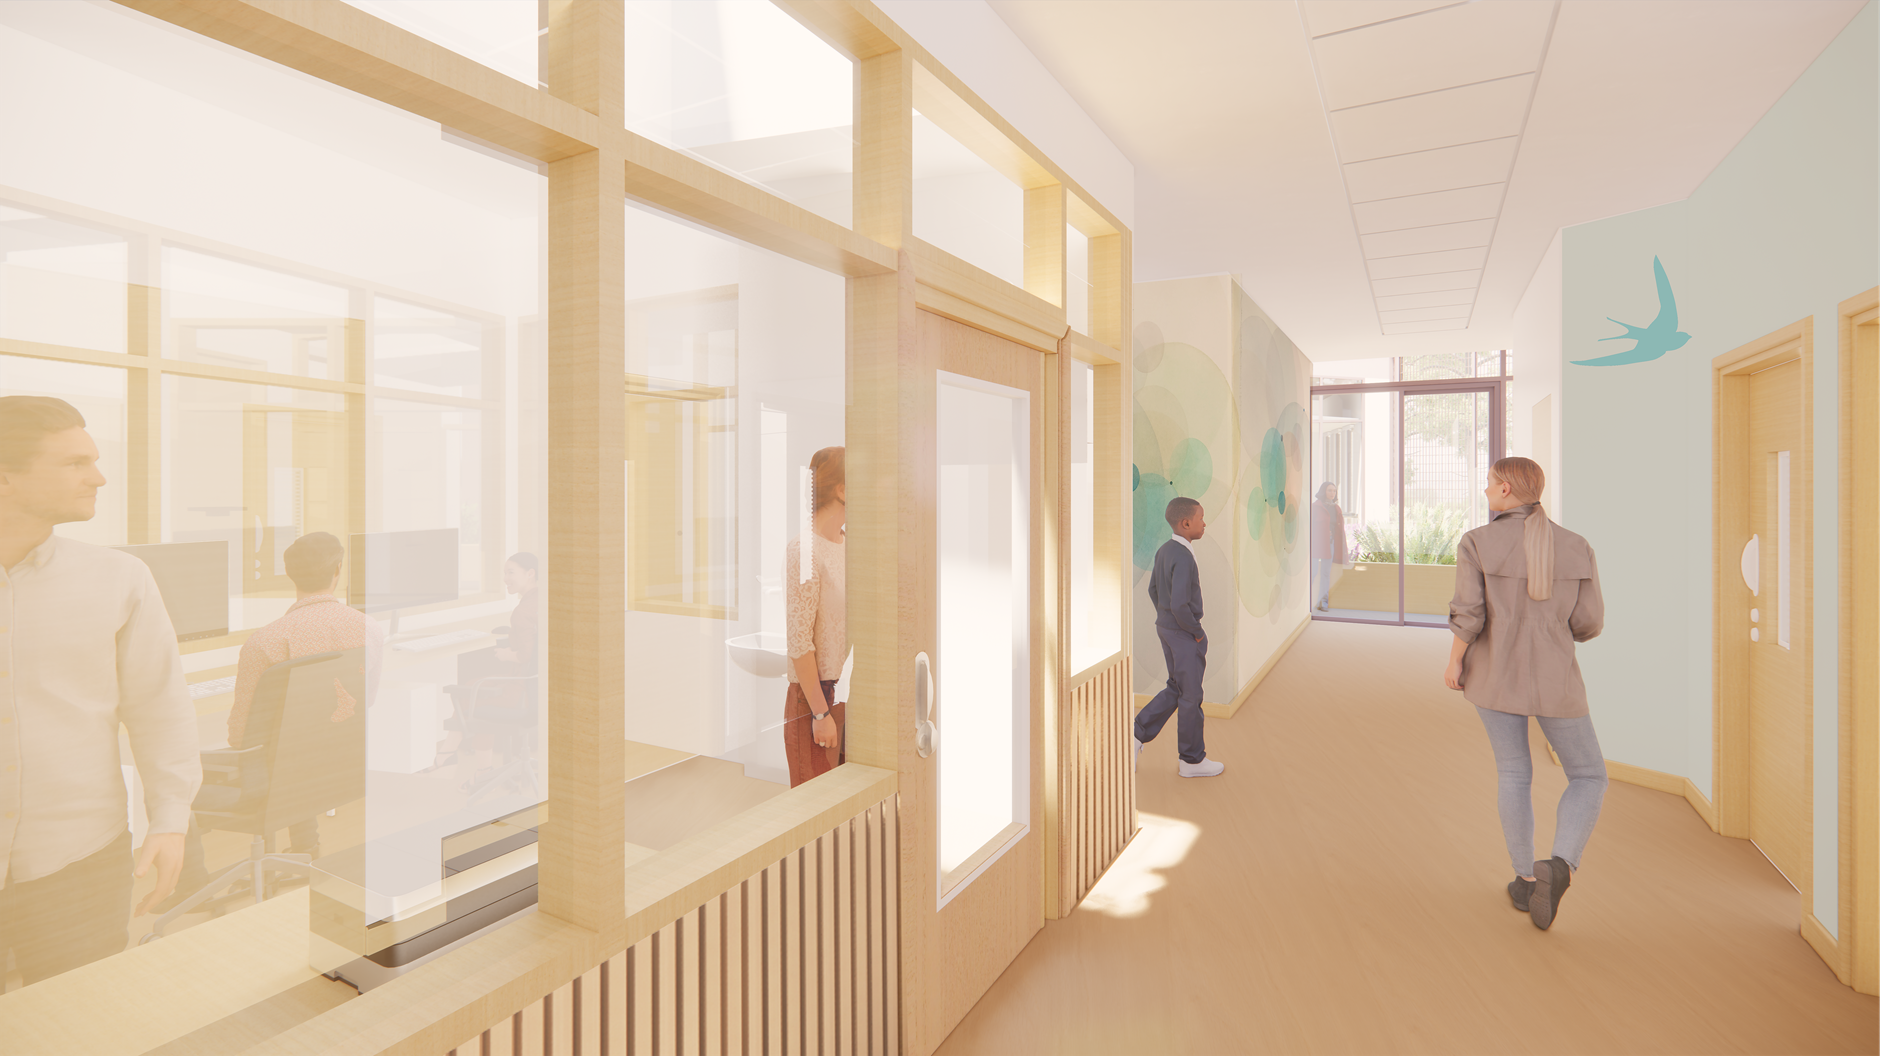 Plans for new young people’s mental health unit in Dorset approved